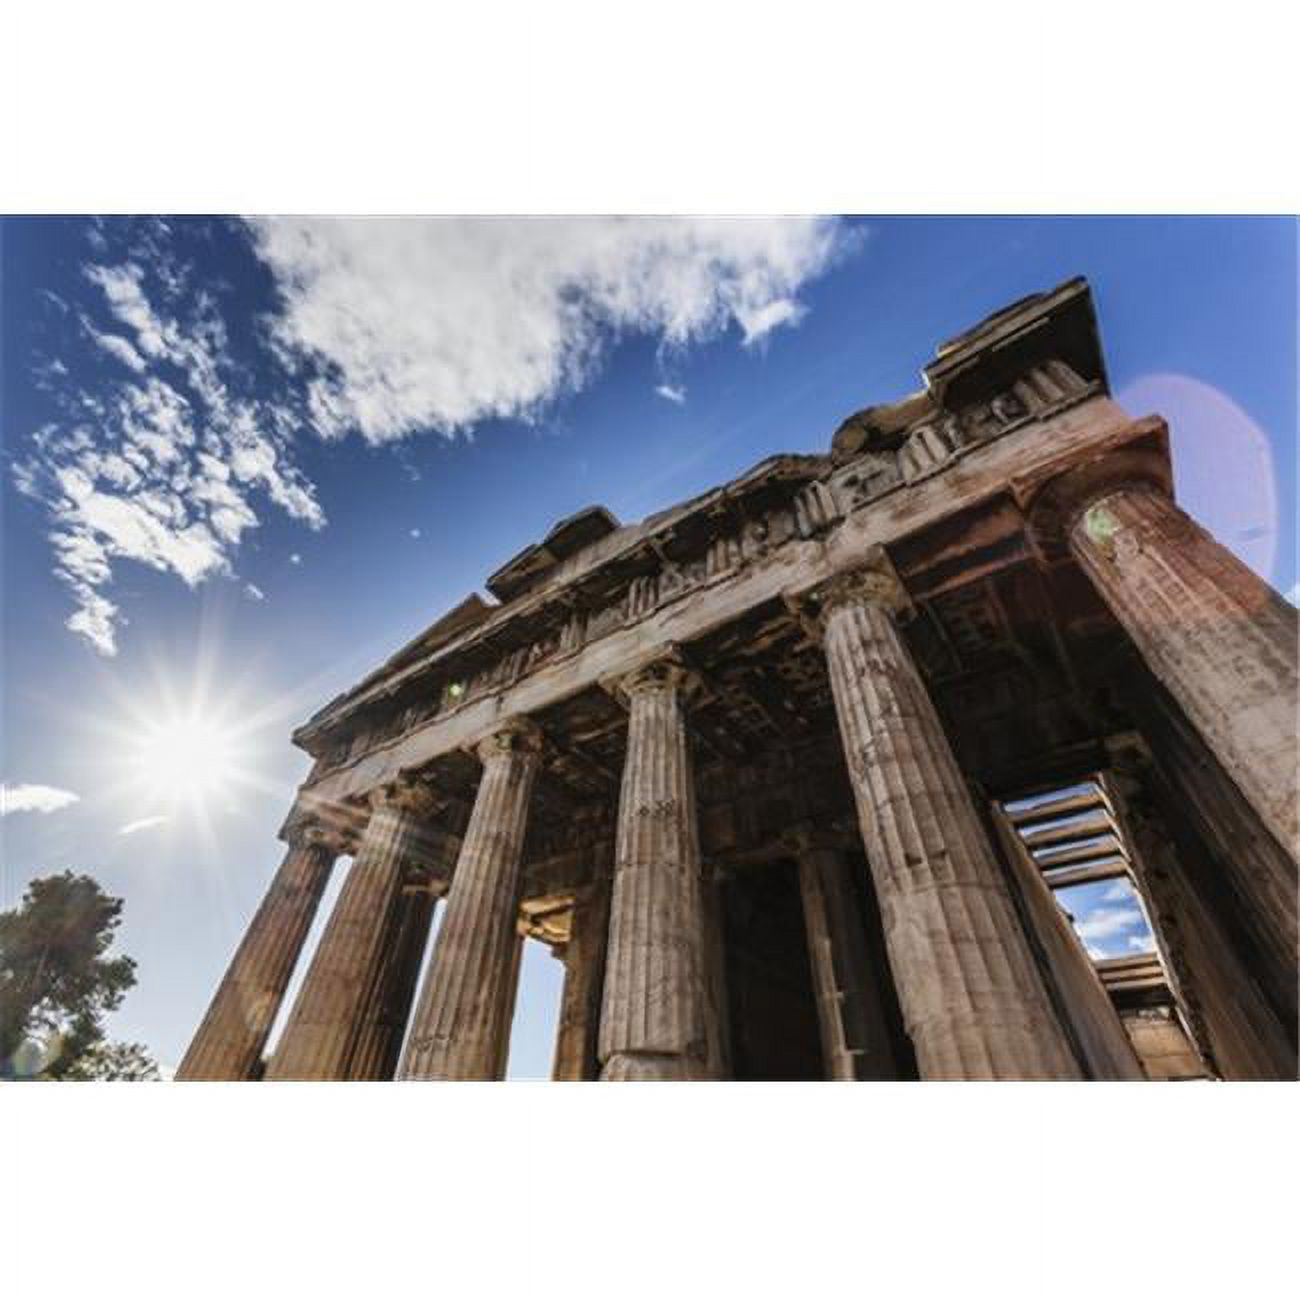 Posterazzi  Temple of Hephaestus - Athens Greece Poster Print by Reynold Mainse - 38 x 24 - Large - image 1 of 1